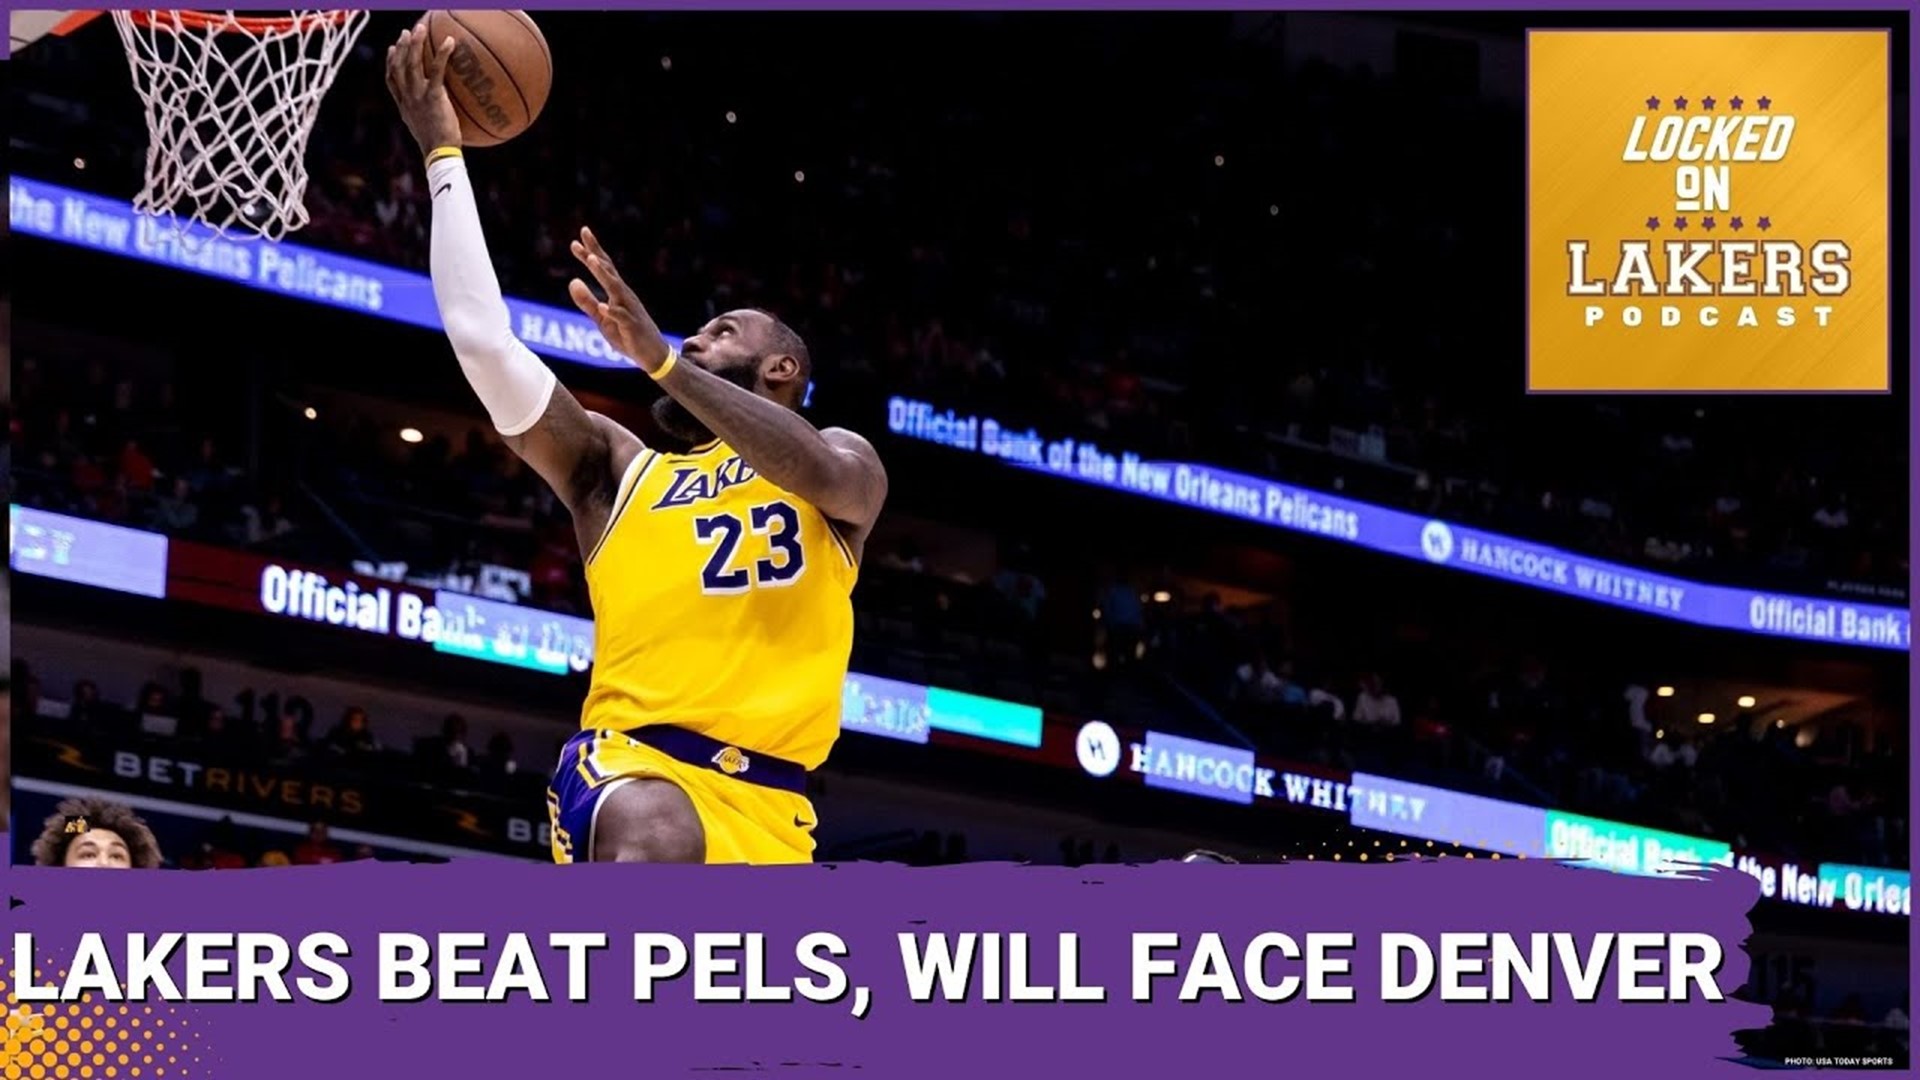 This win didn't quite look like the others, but in the end the Lakers got what they came for, and once again defeated the New Orleans Pelicans